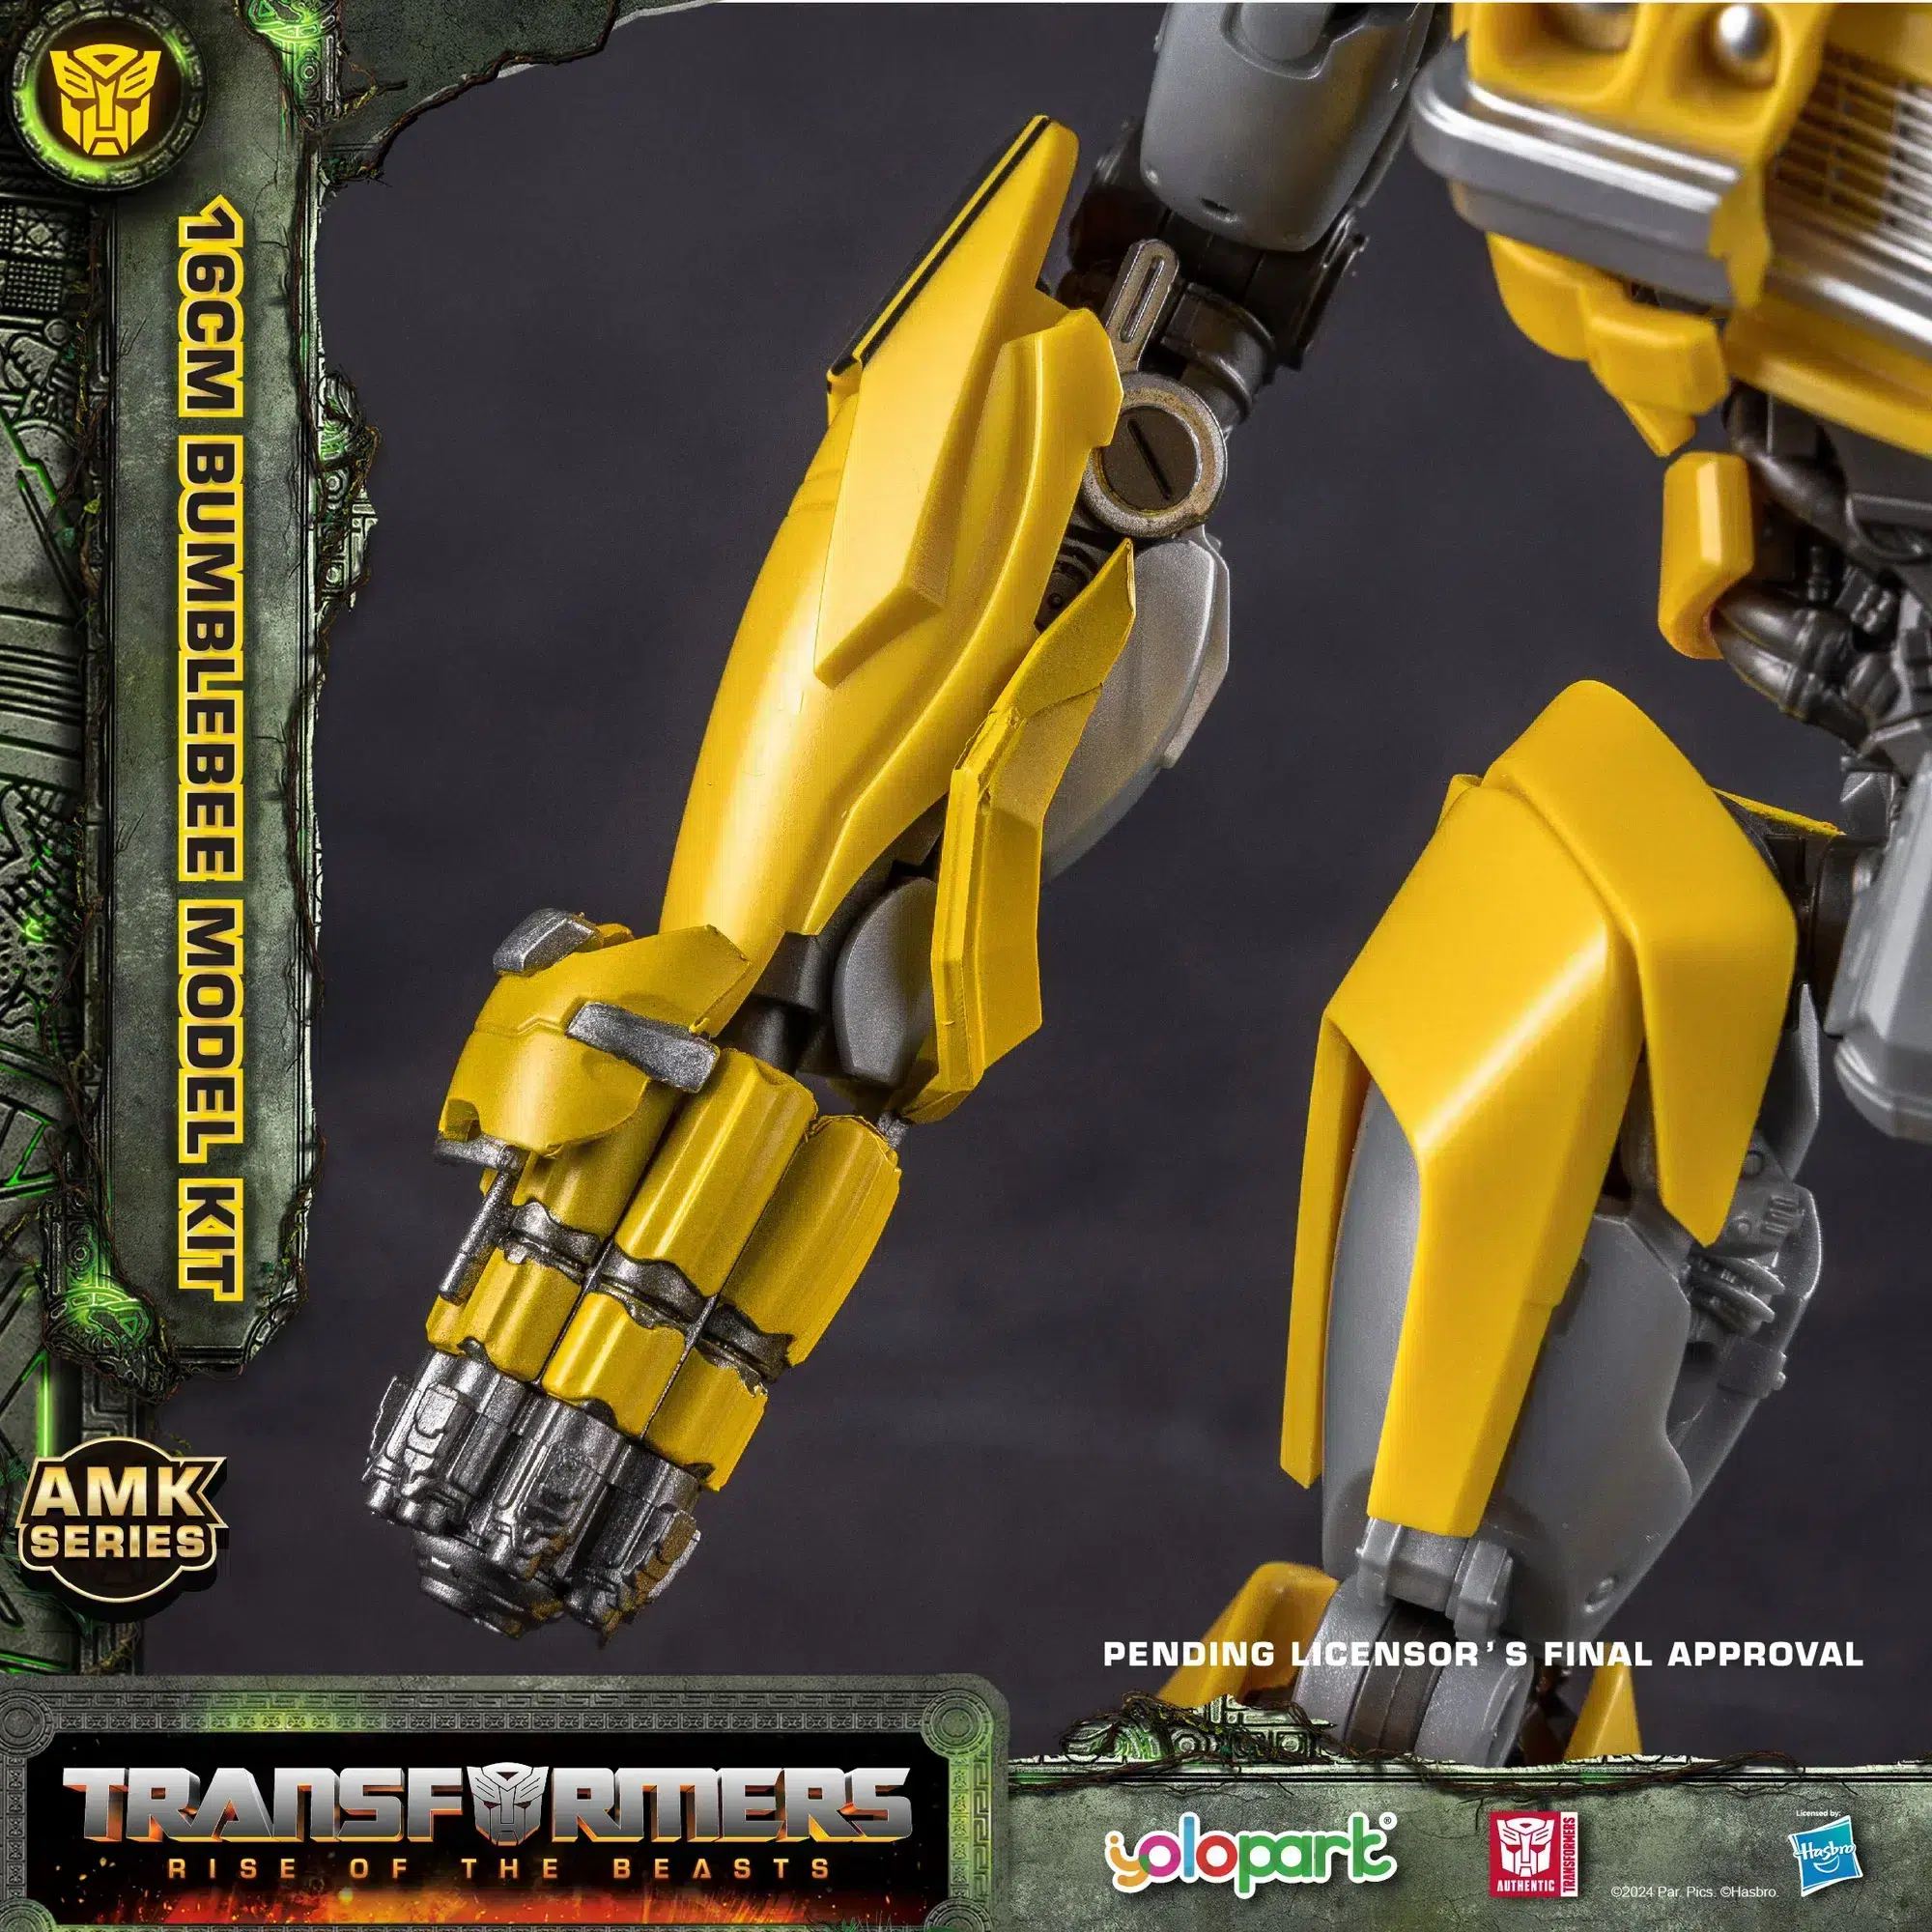 Yolopark Amk Series Transformers Rise Of The Beasts Cheetor Model Kit 6